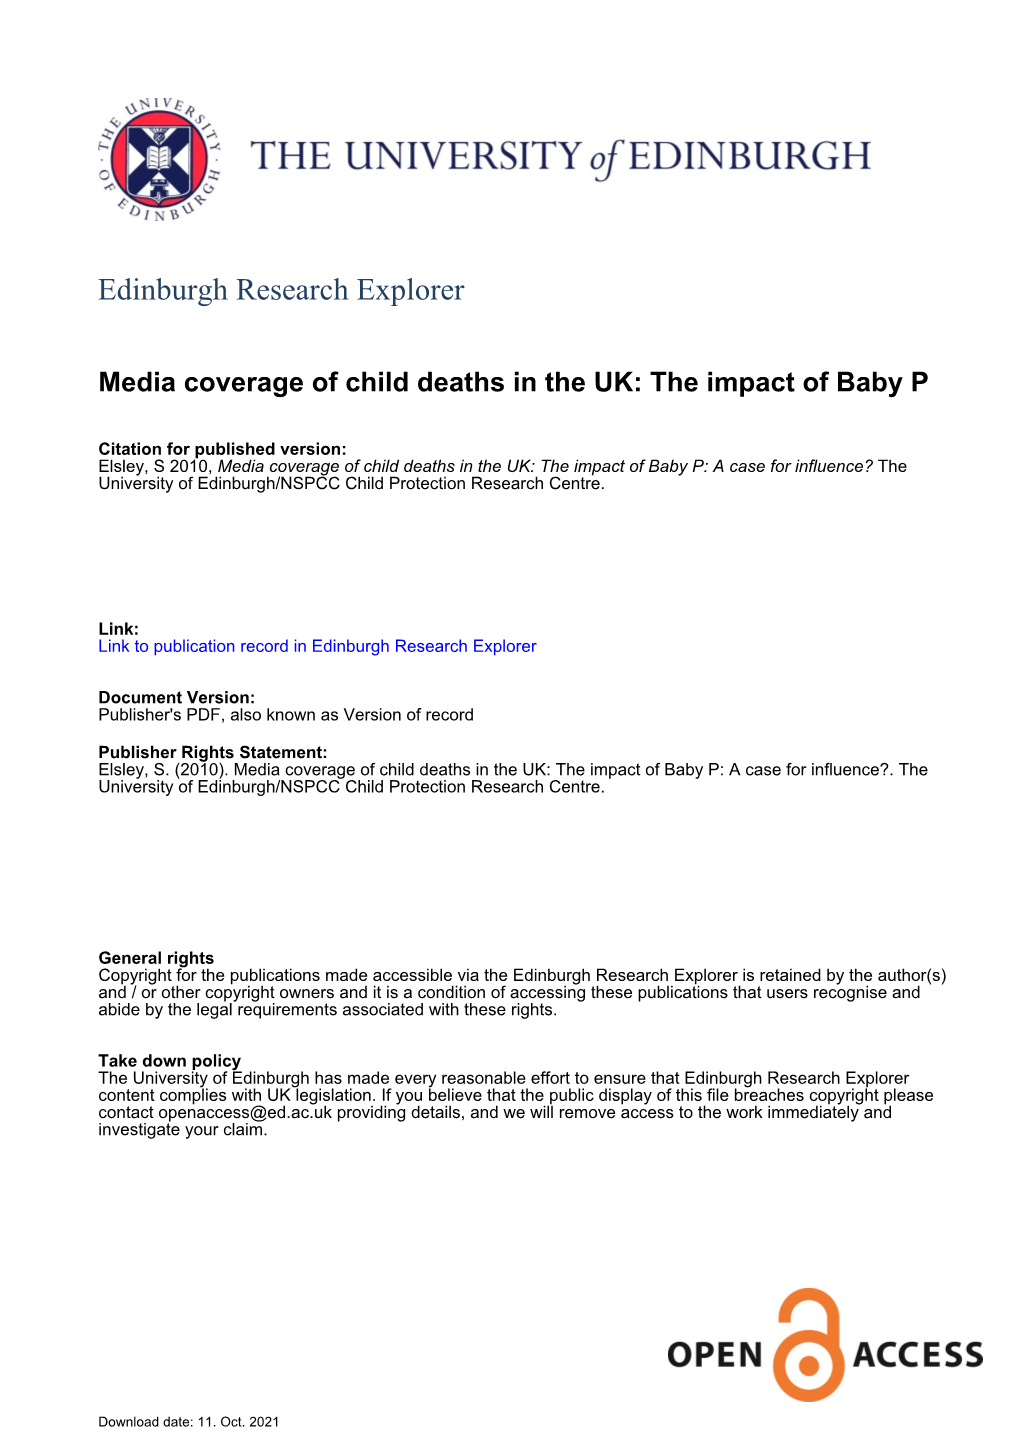 Media and Child Deaths